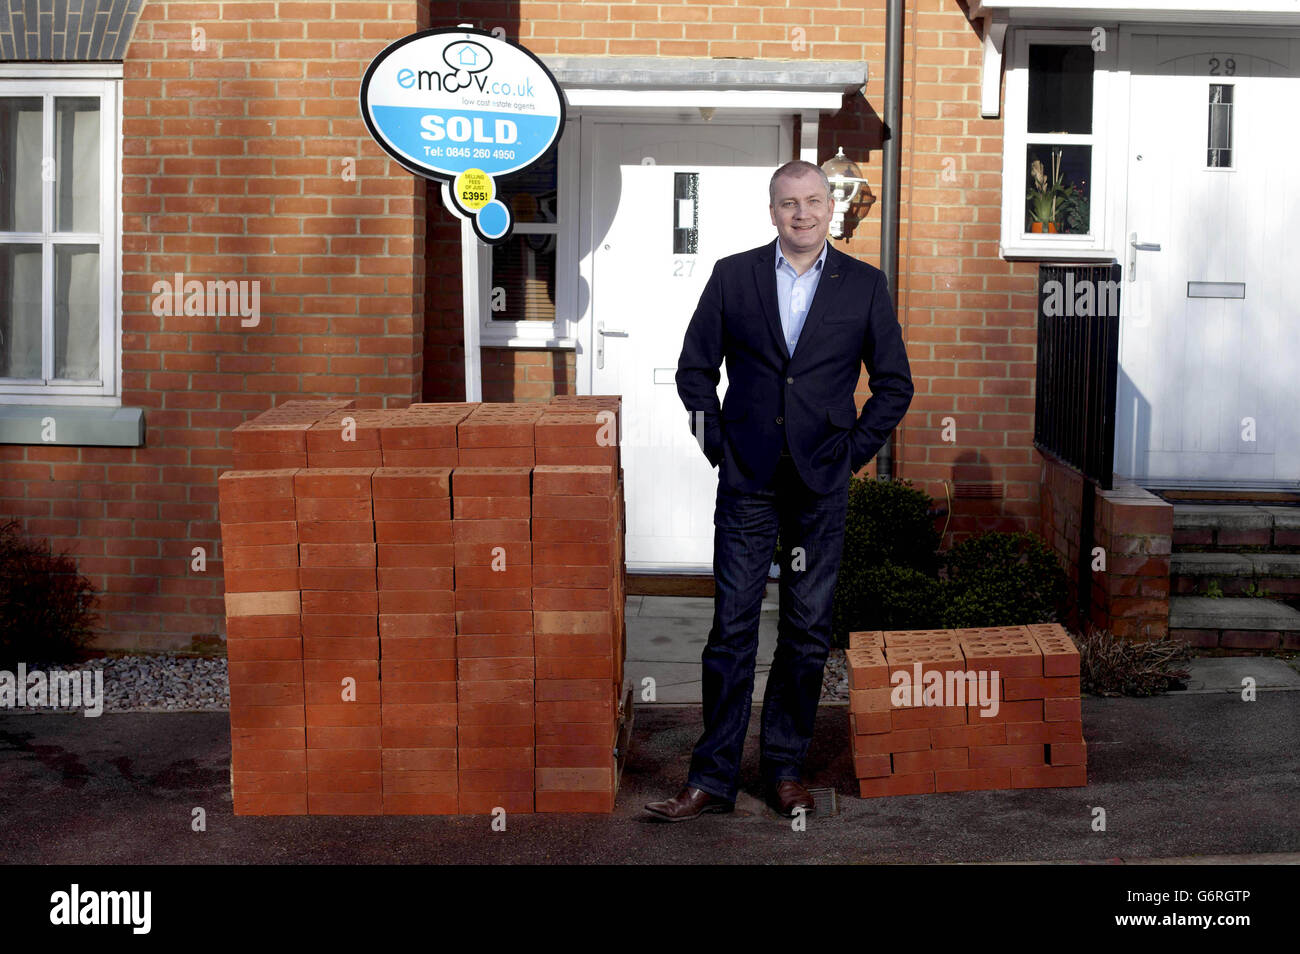 Russell Quirk, Founder of low cost online estate agency eMoov.co.uk, compares the different levels of commission earned comparatively by UK high street estate agents versus eMoov.co.uk, represented by piles of bricks outside a property in Brentwood, Essex. Stock Photo